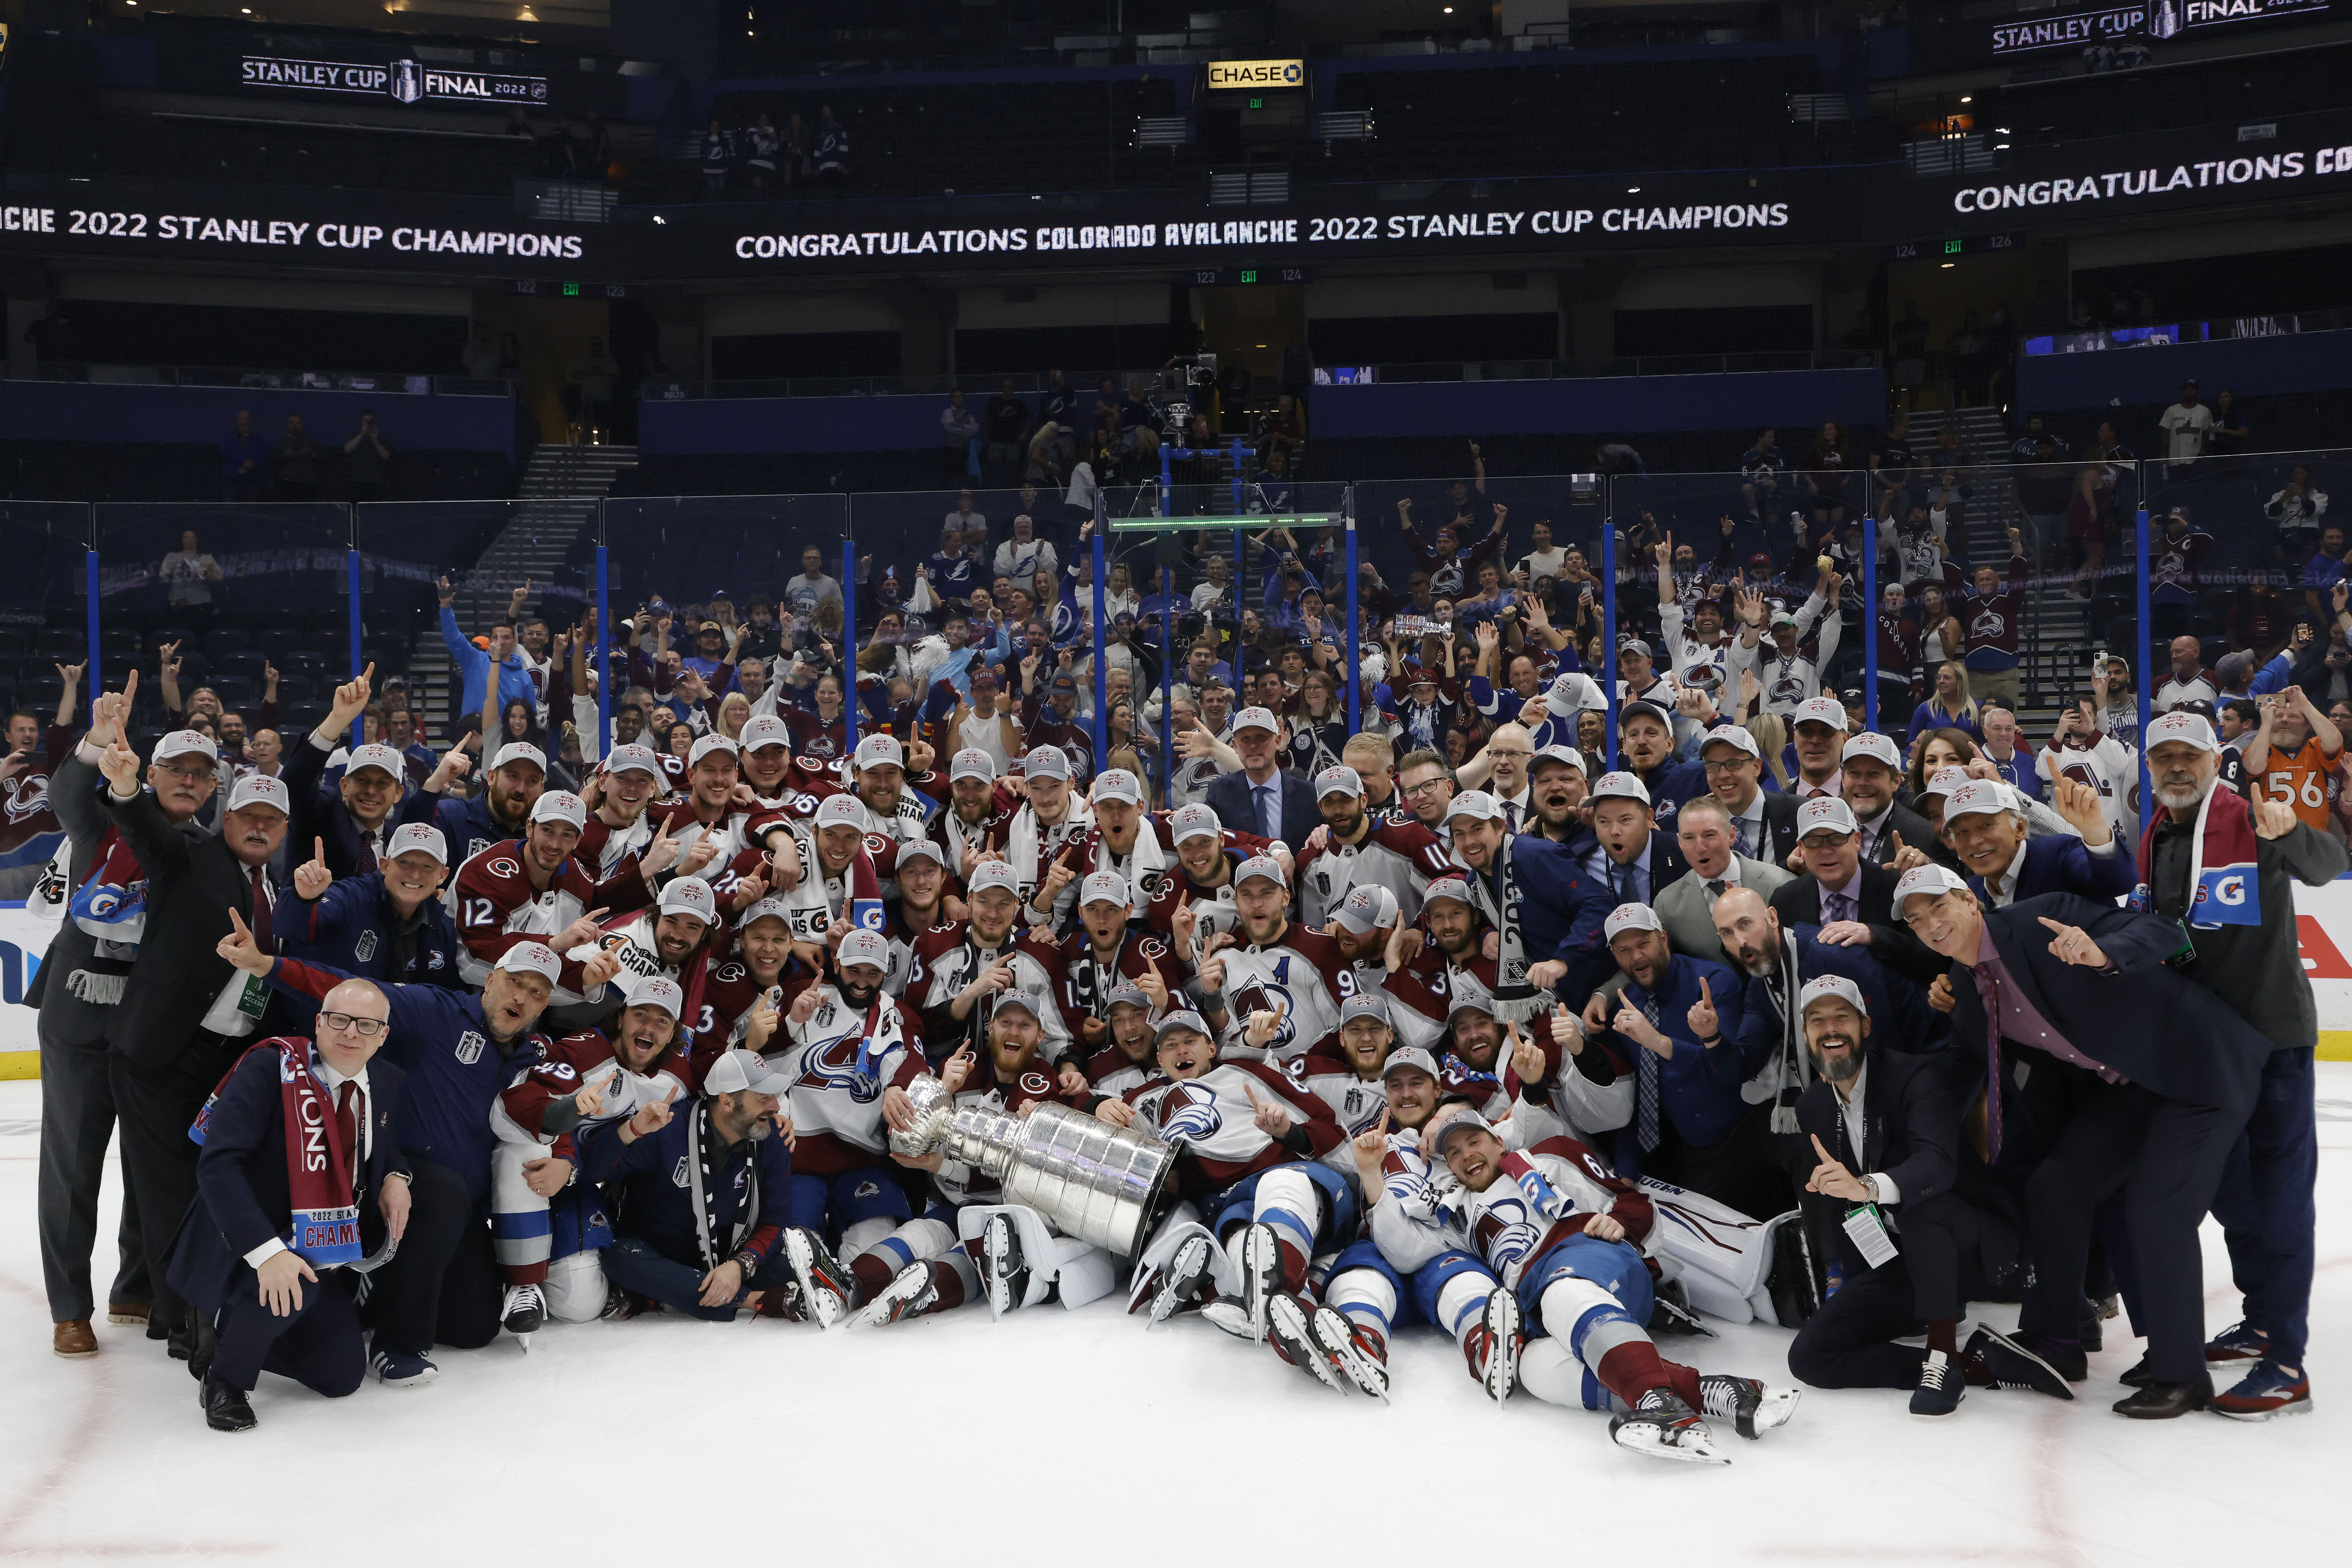 STANLEY CUP CHAMPS: Colorado Avalanche set records with Stanley